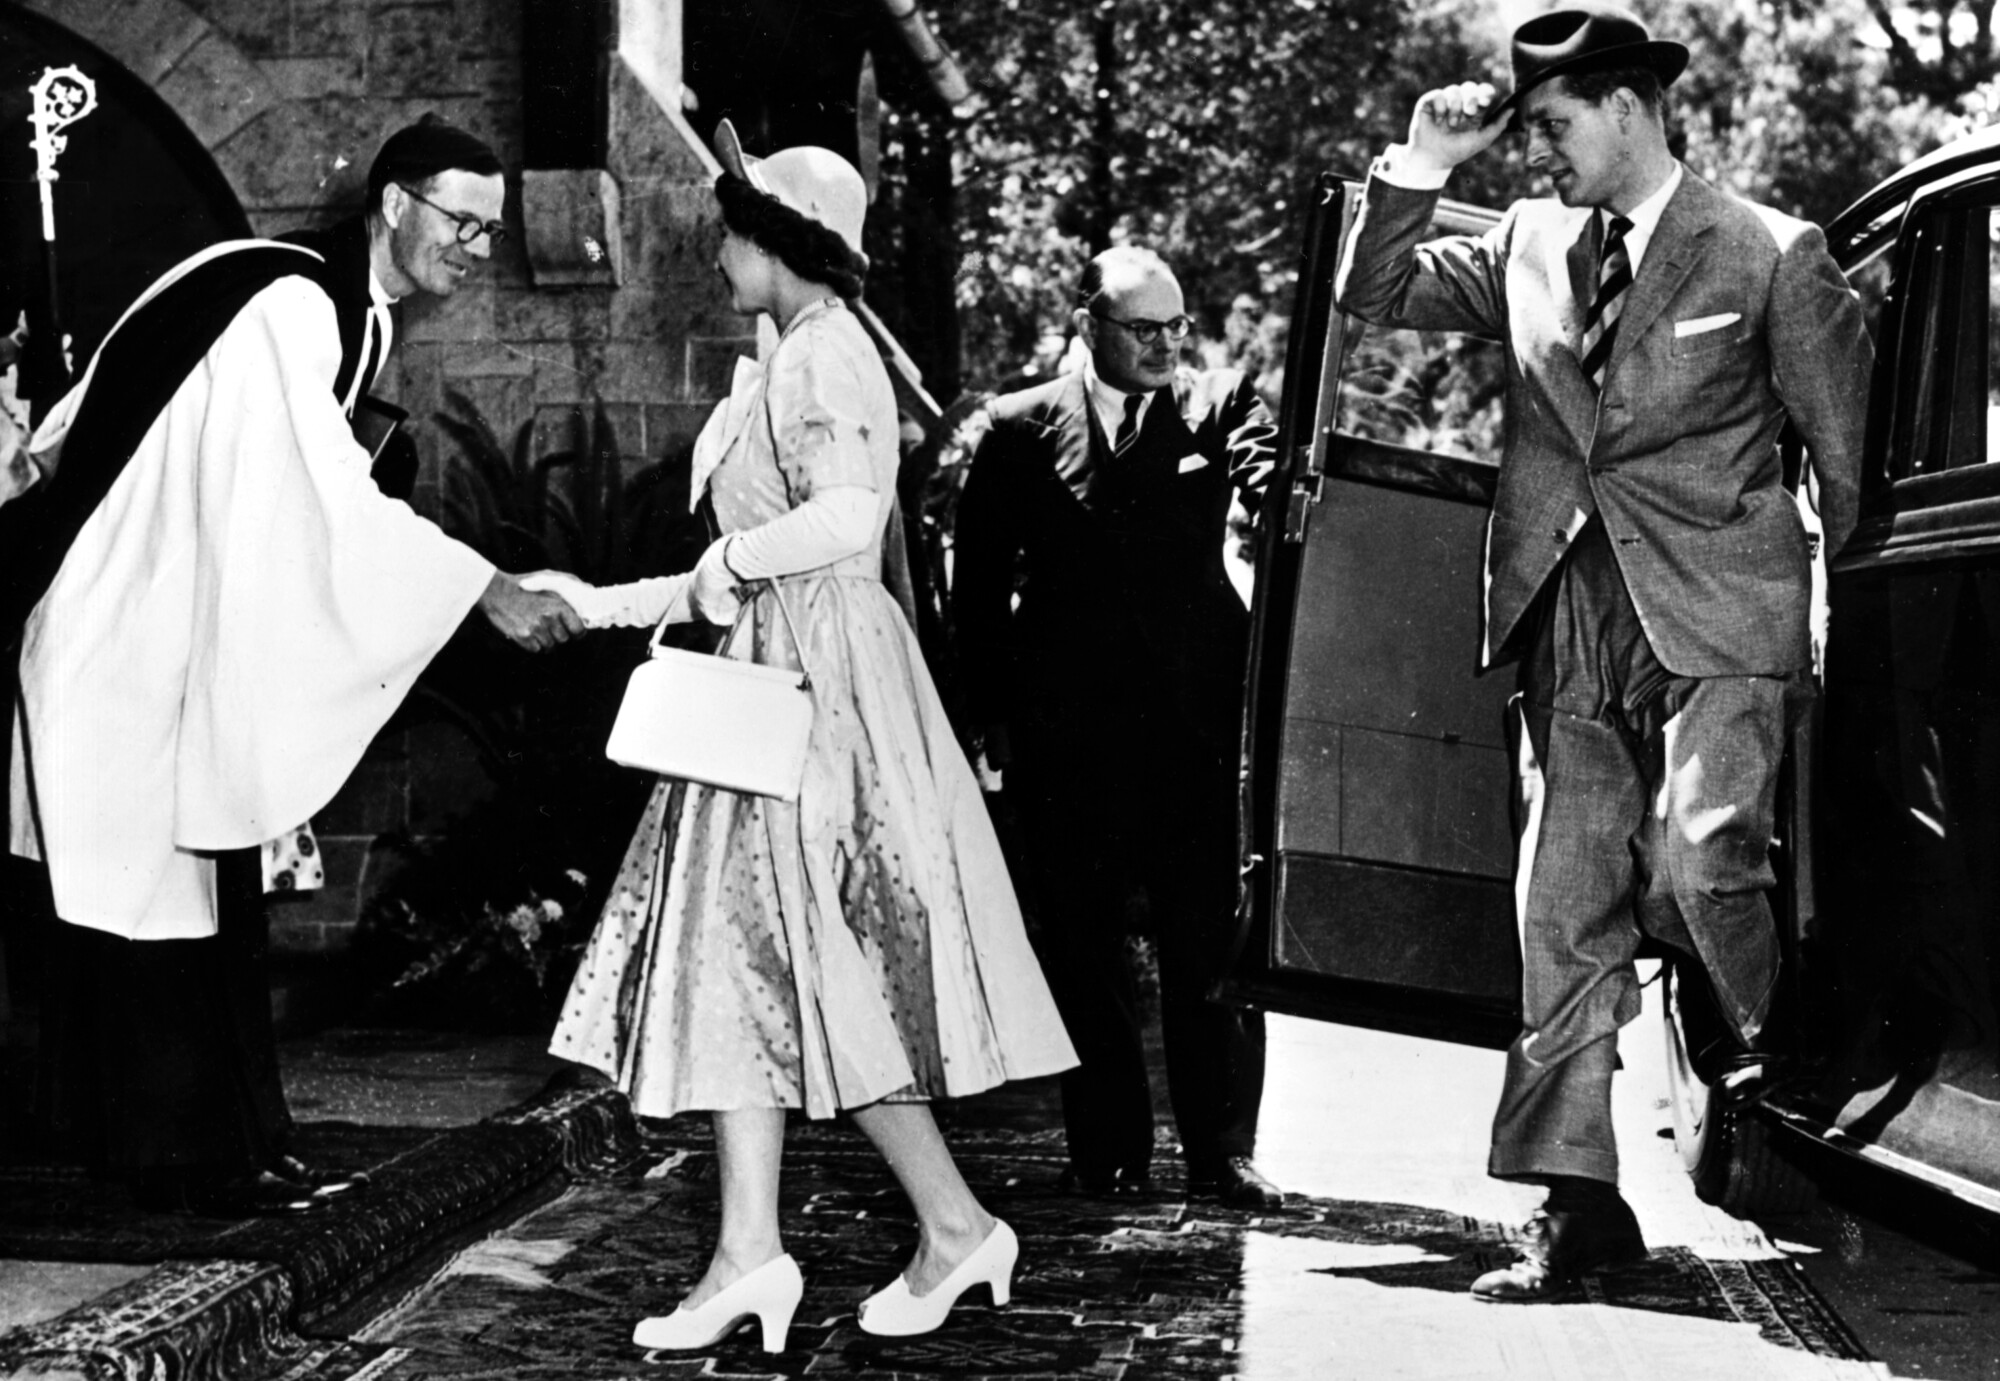 A man in clergy robes, left, shakes the hand of a woman in a dress and hat, as a man on the right emerges from a car 